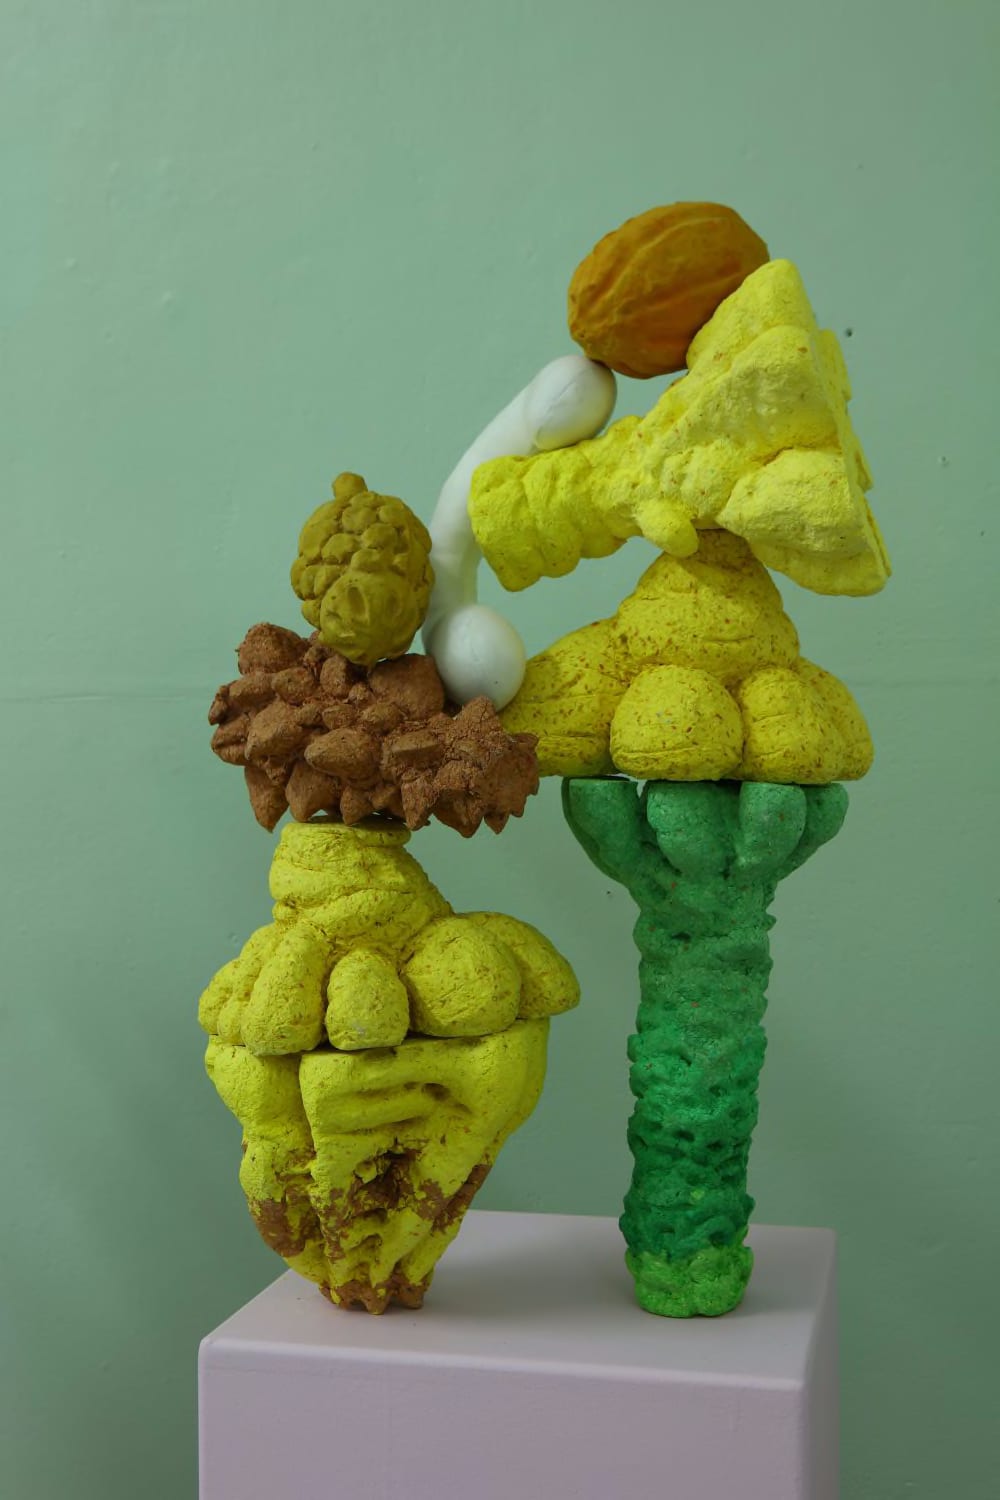 Two sculptural forms which are almost like figures. Lumpy and in yellow, green and brown they are organic-like materials stacked on top of each other.